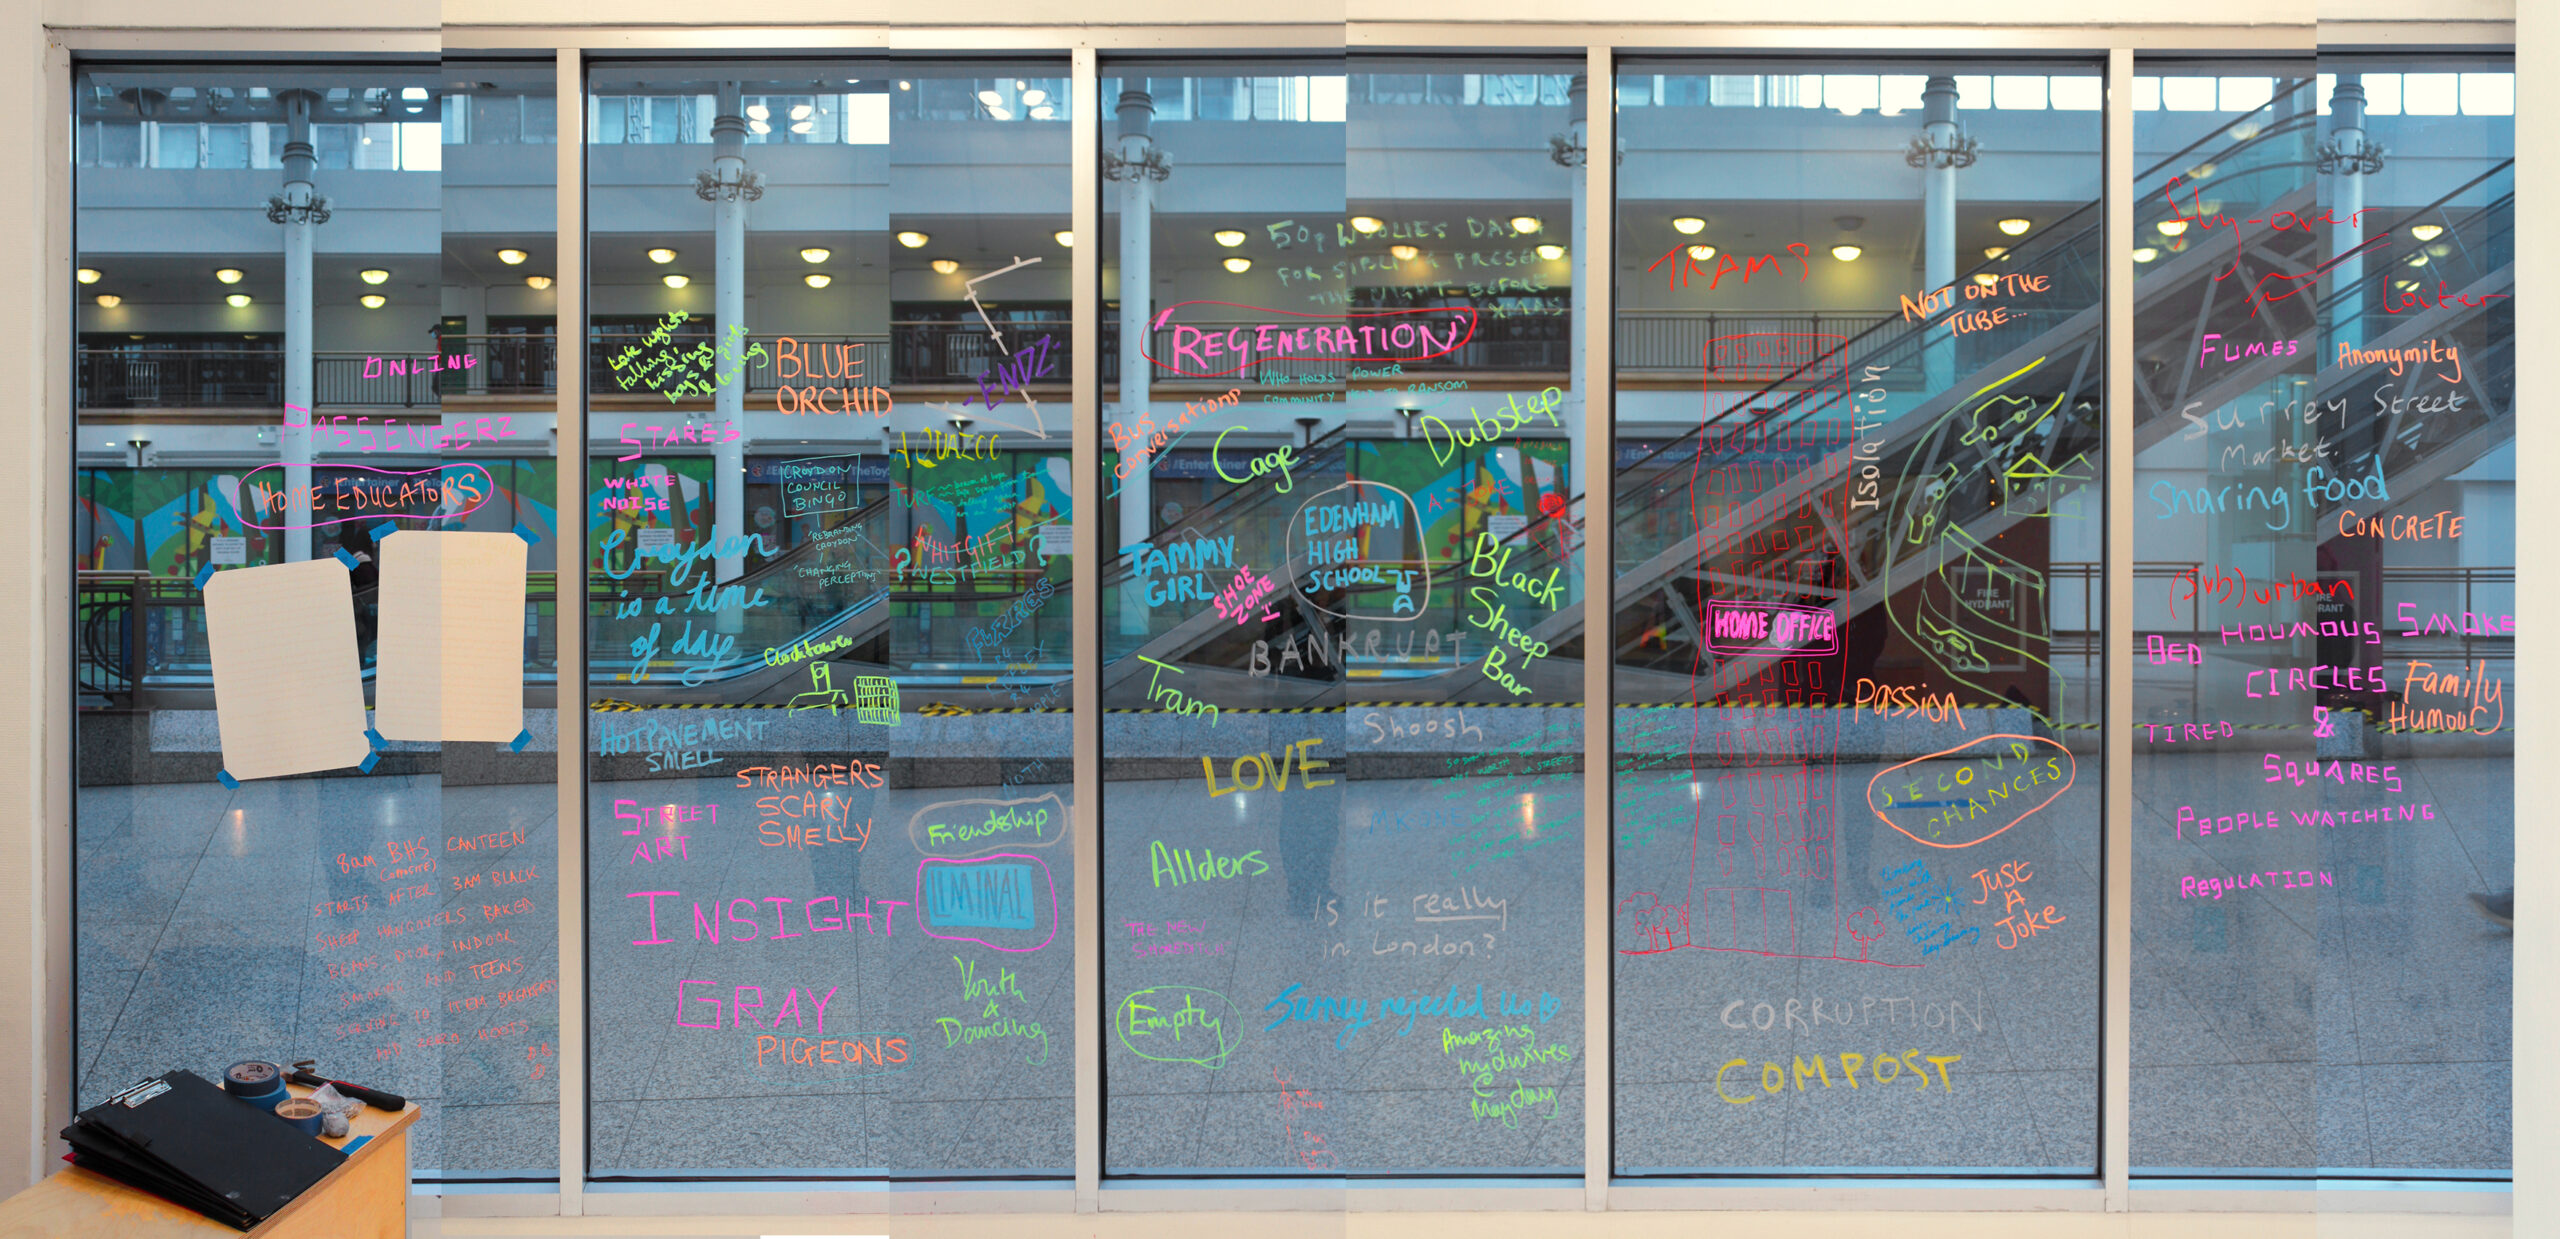 the outside of the TURF building after people wrote on the windows